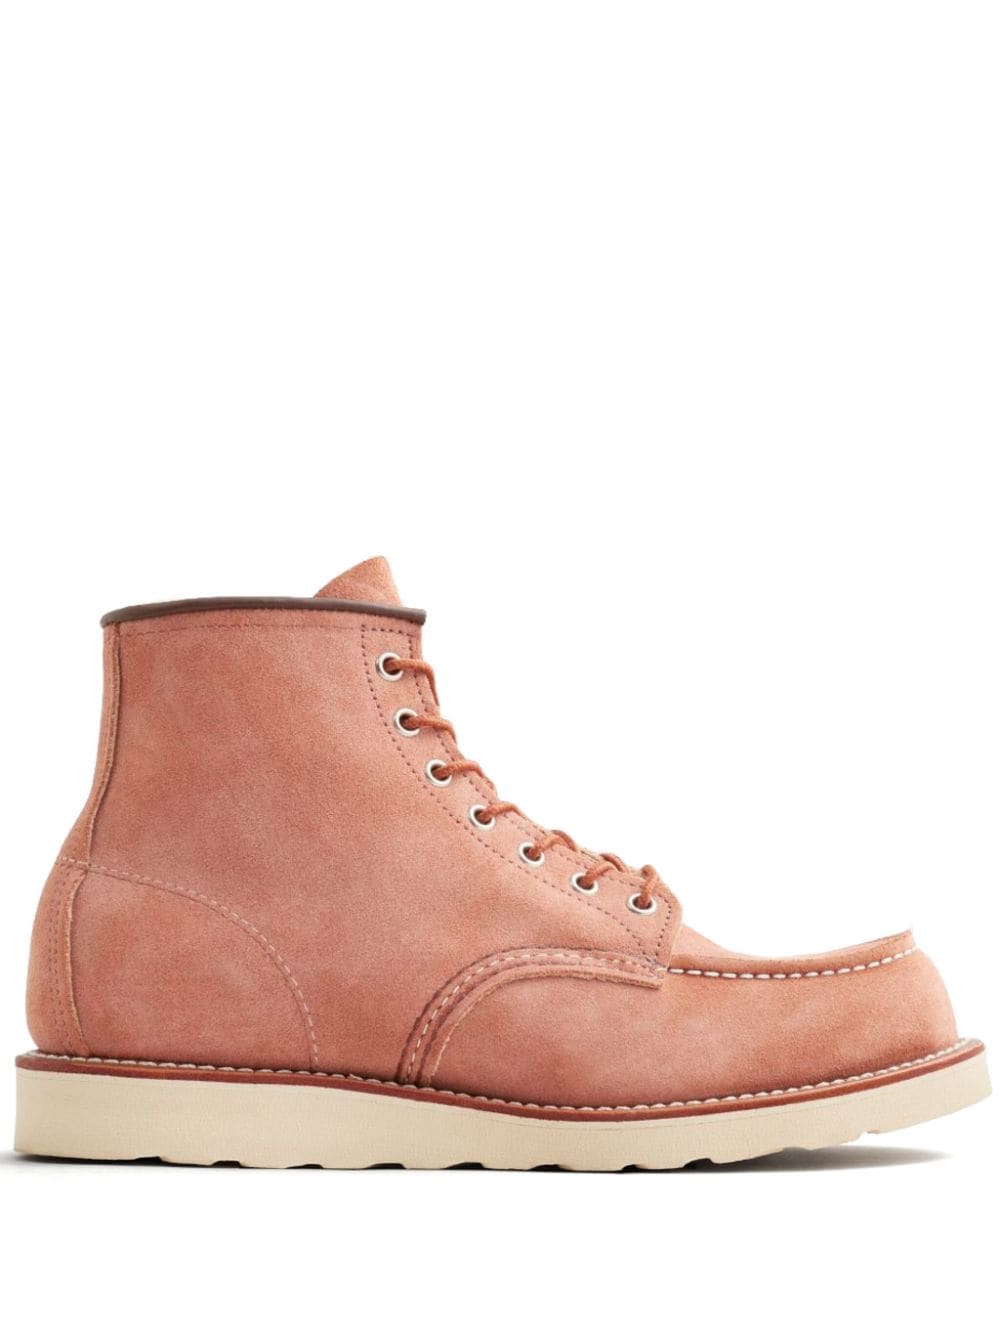 Red Wing Shoes Classic Moc ankle boots - Pink von Red Wing Shoes